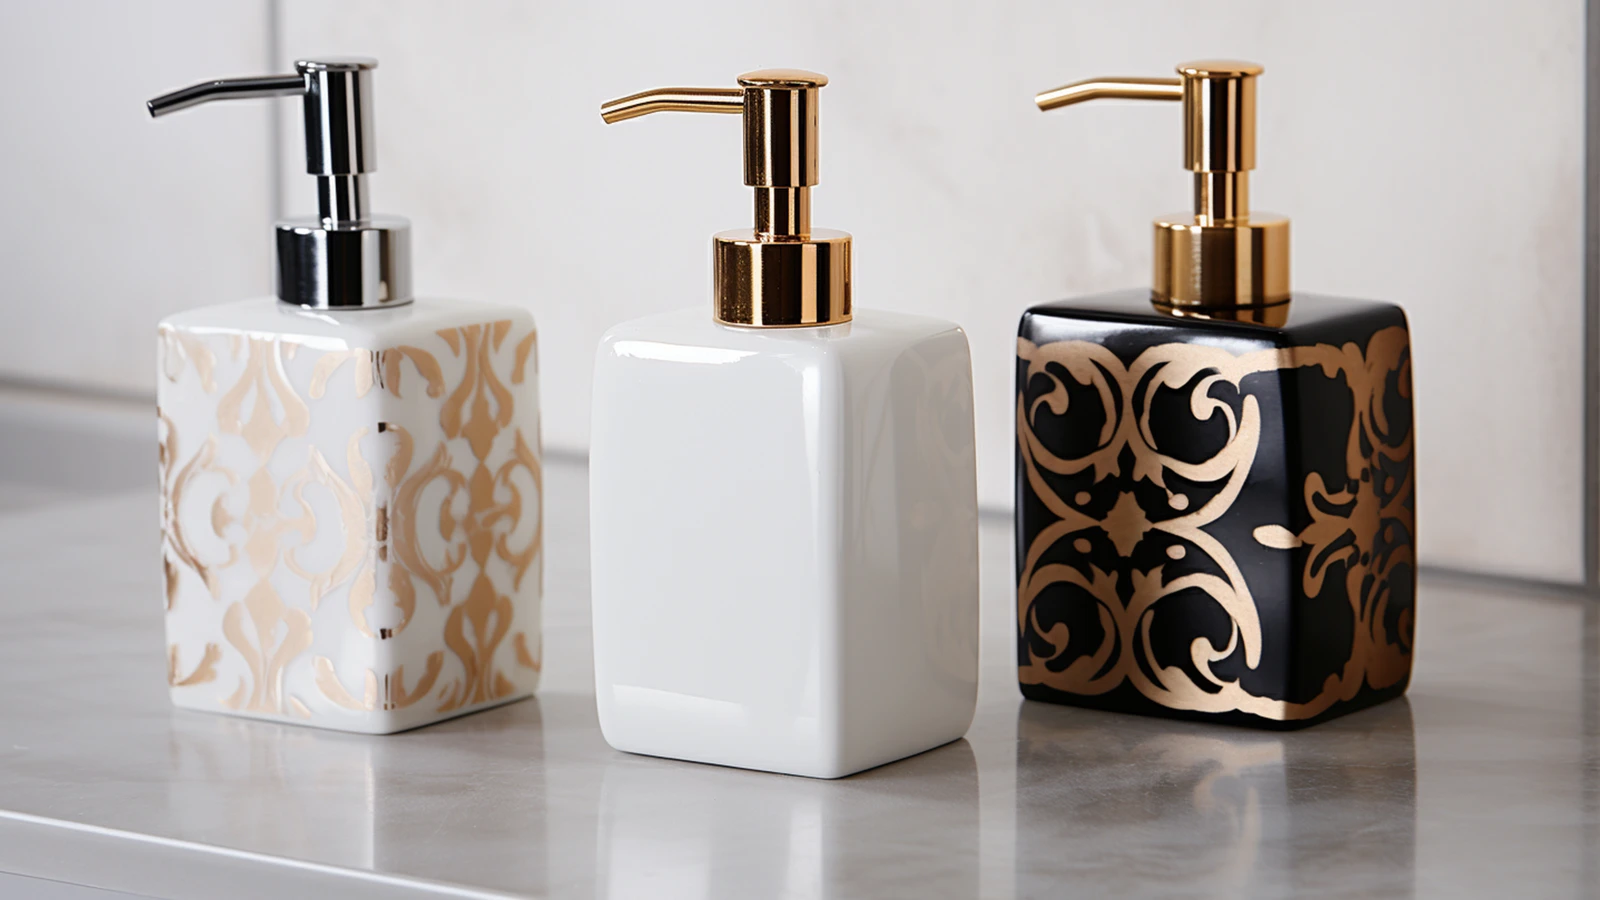 Small bathroom counter decorating ideas: three soap dispensers on a counter top.